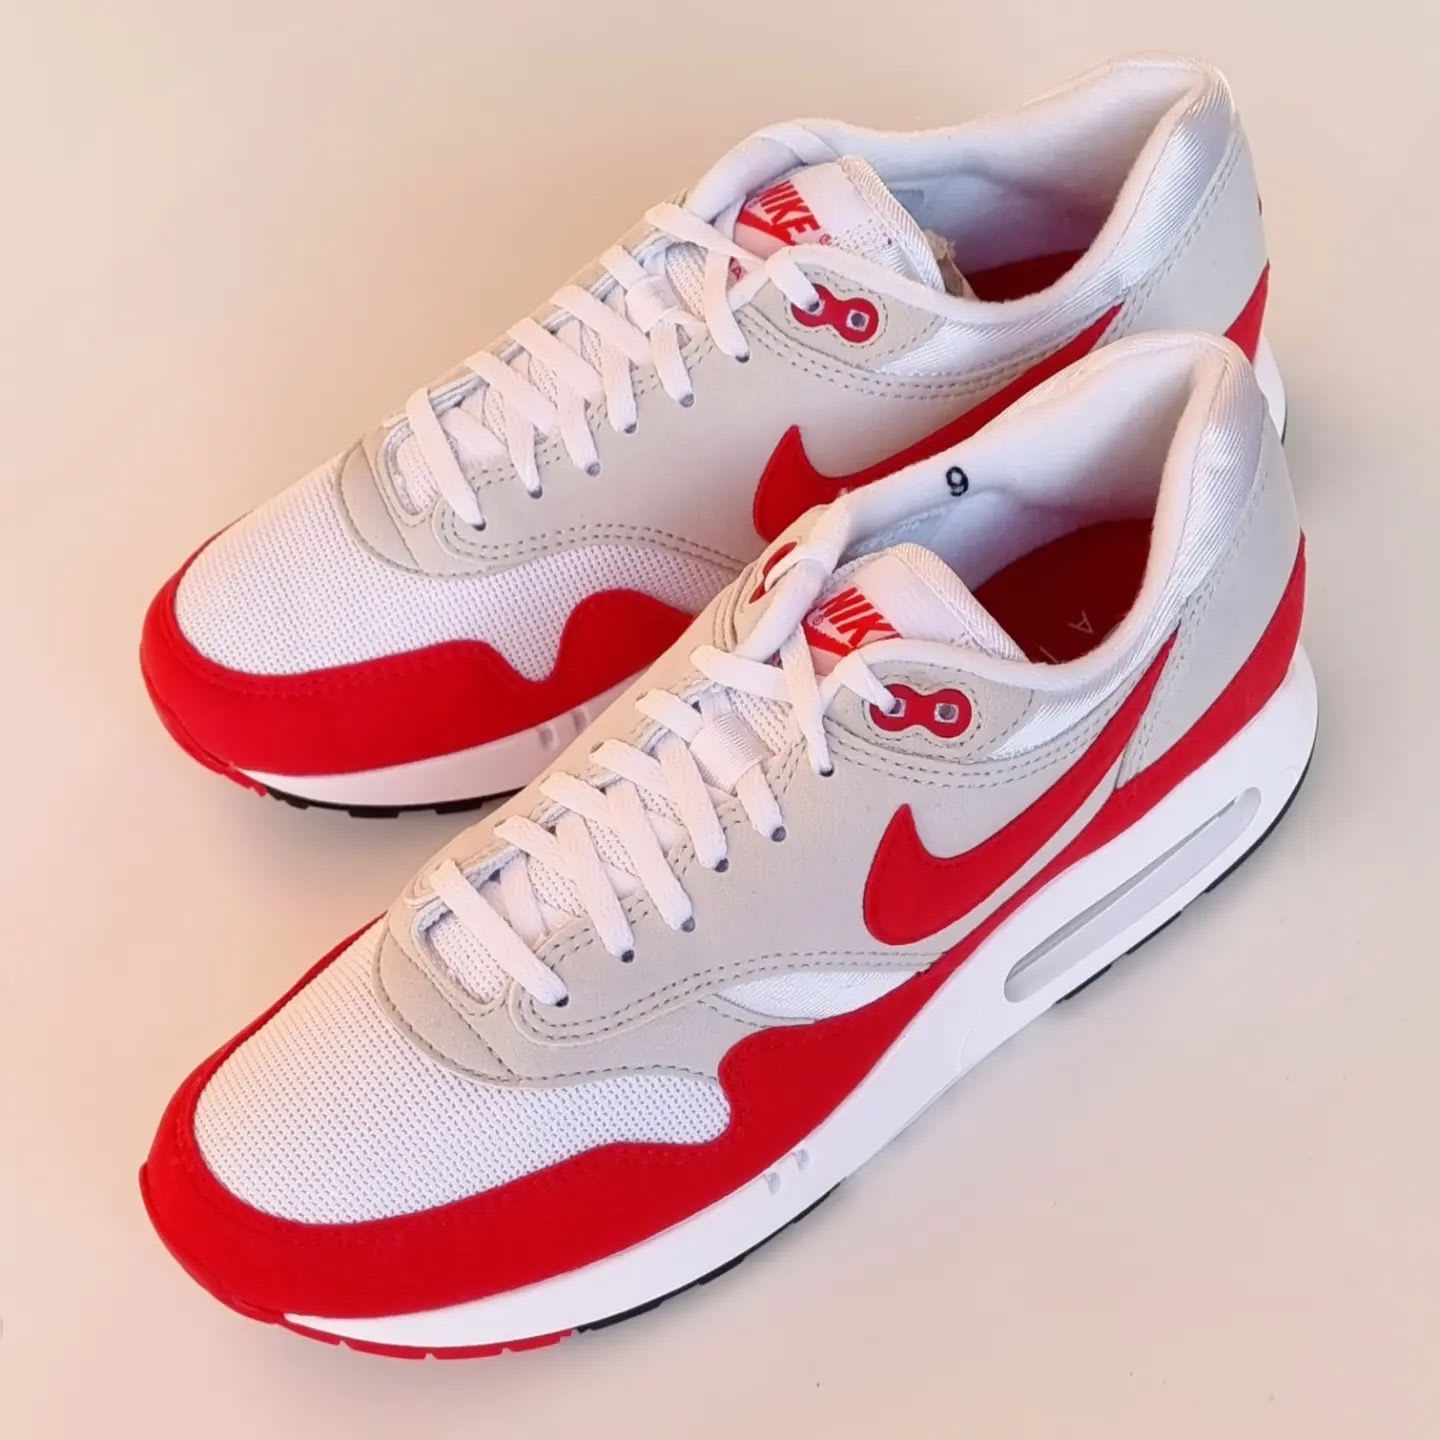 Nike Air Max 1 '86 'Big Bubble' March 2023 Sneaker Release Date